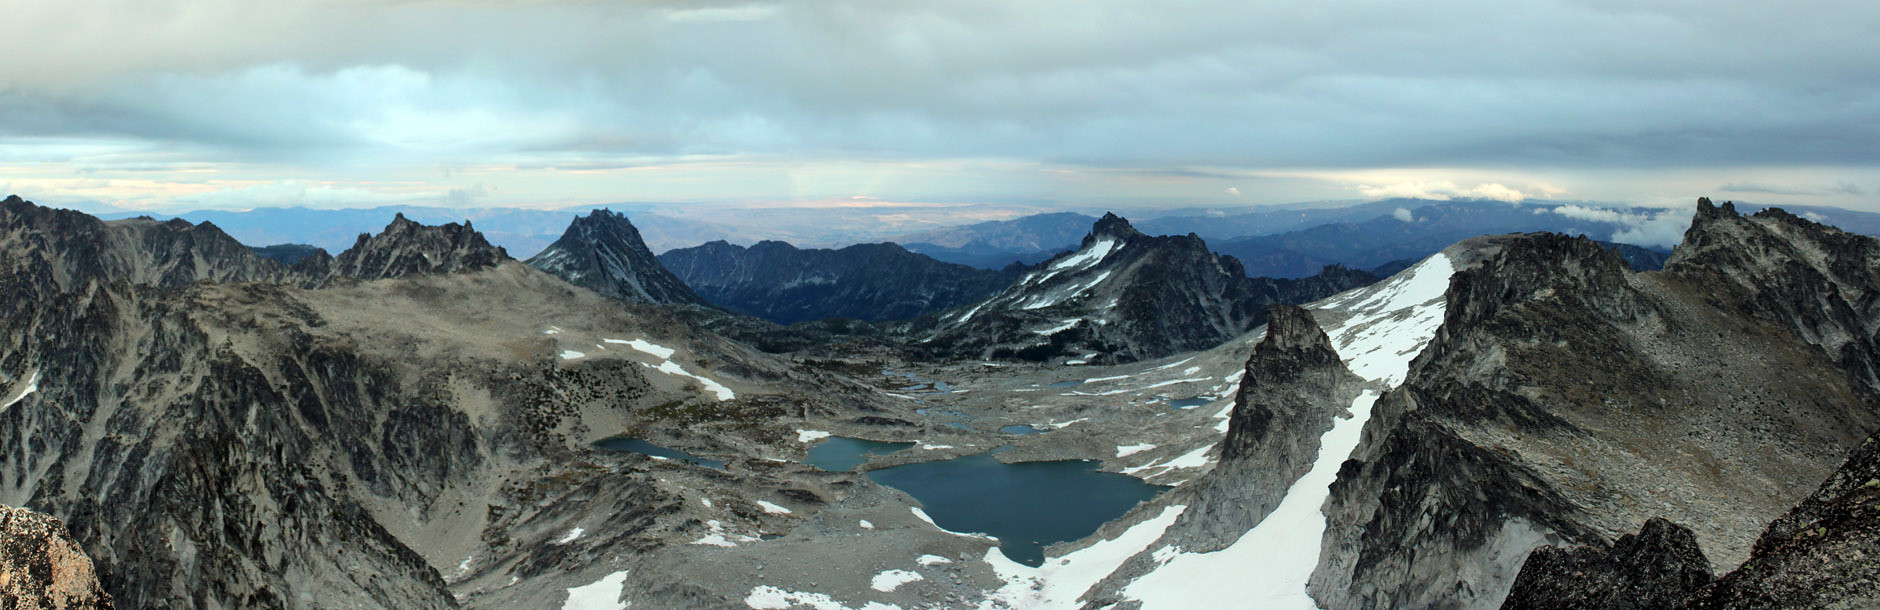 Upper Enchantments panoramic view from Dragontail Peak